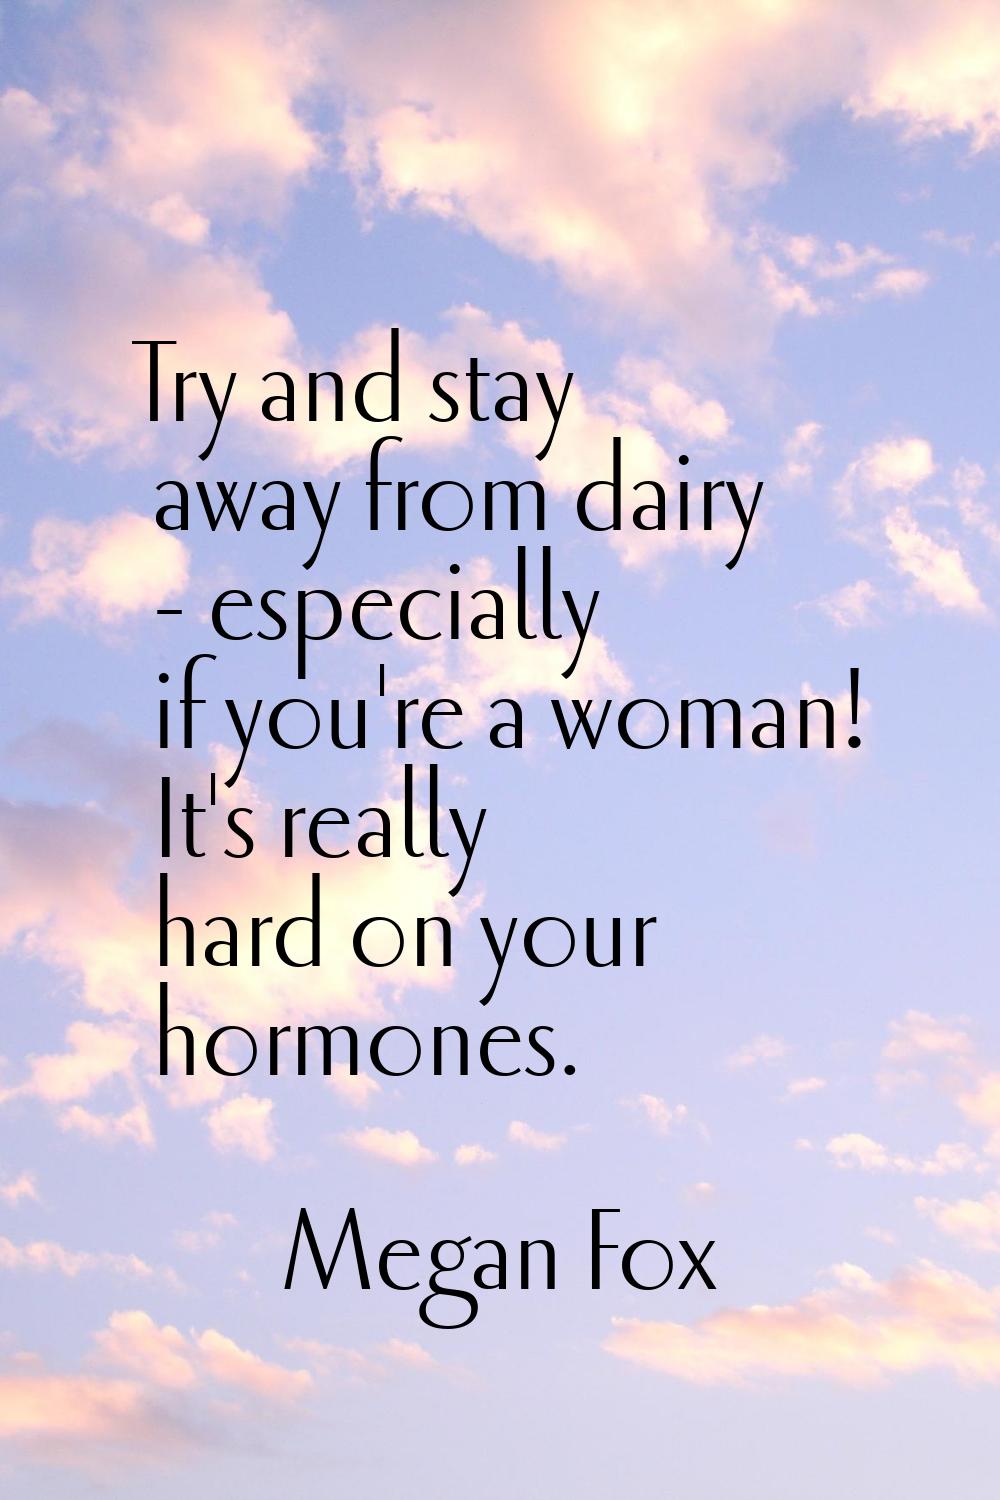 Try and stay away from dairy - especially if you're a woman! It's really hard on your hormones.